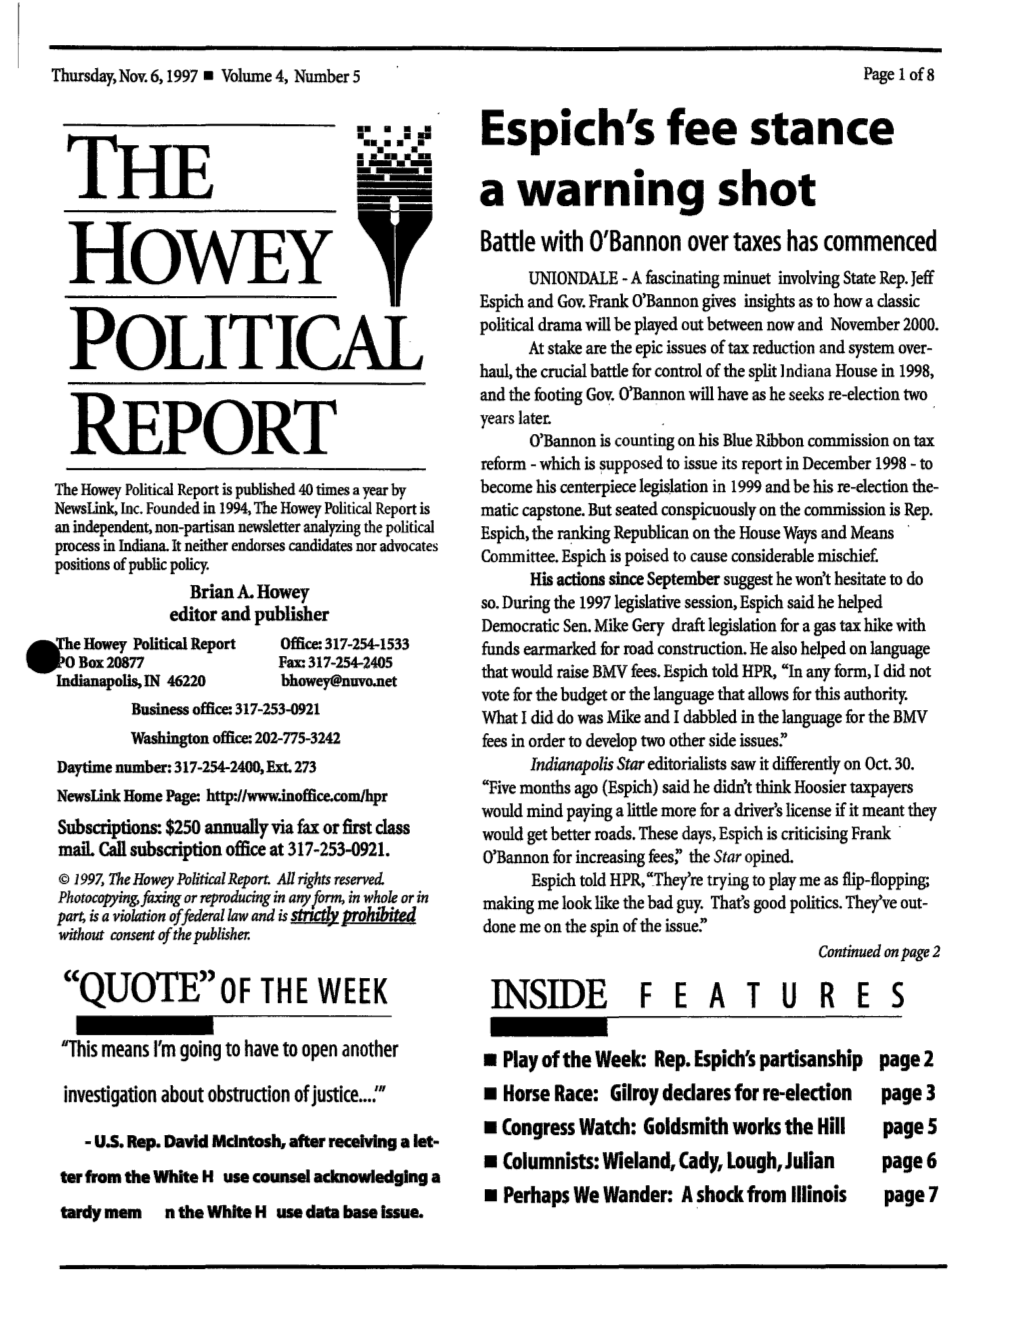 Howey Political Report Is Published 40 Times a Year by Become His Centerpiece L~Lation in 1999 and Be His Re-Election The­ Newslink, Inc